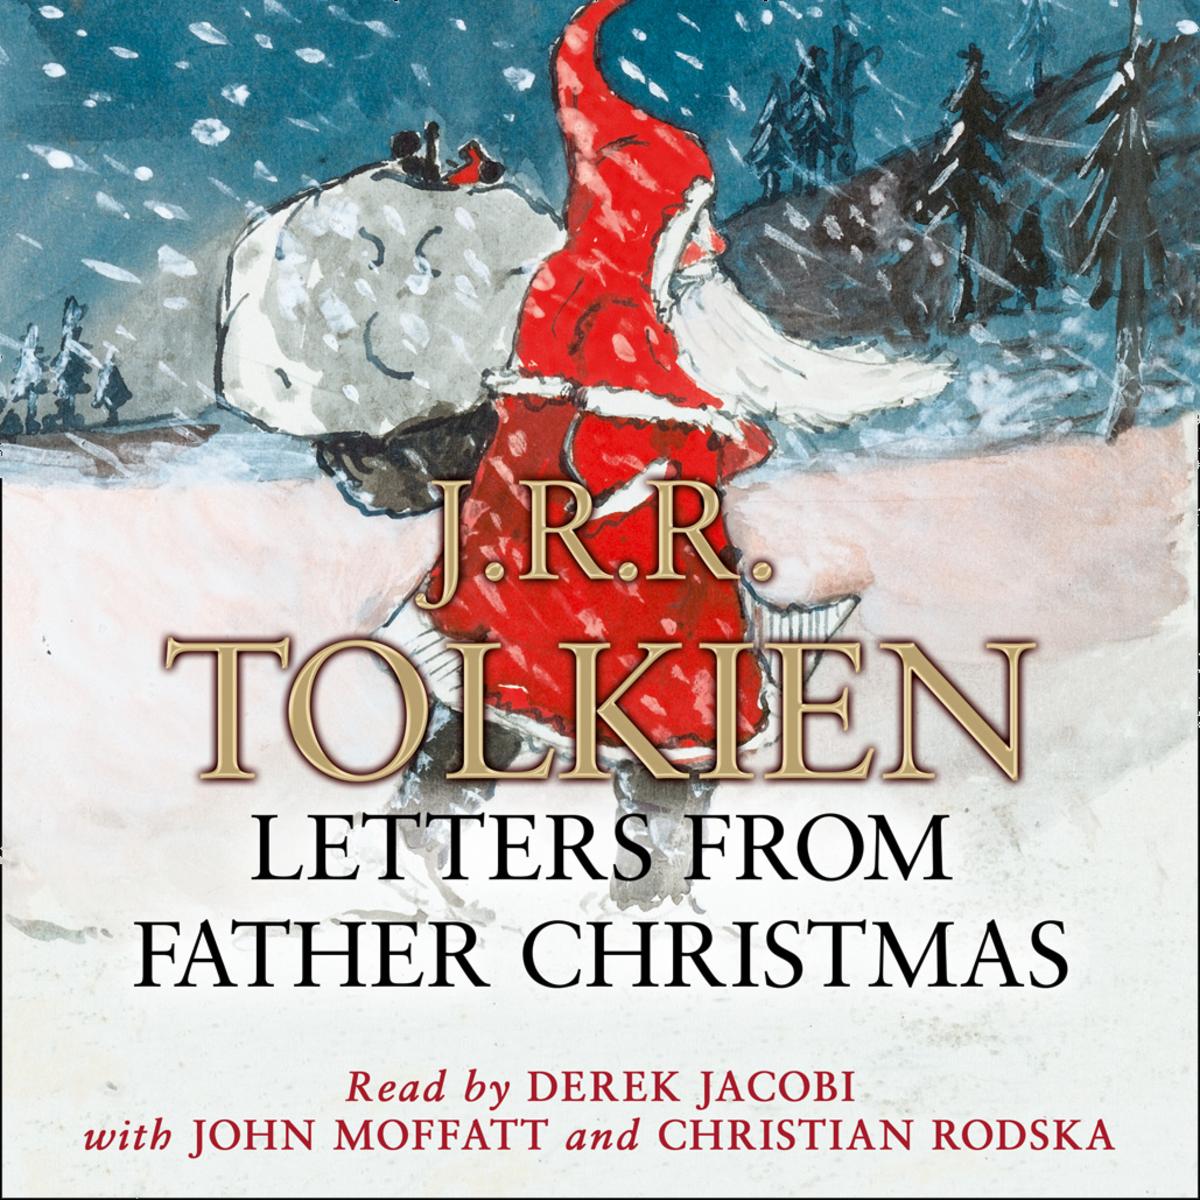 letters from father christmas by jrr tolkien